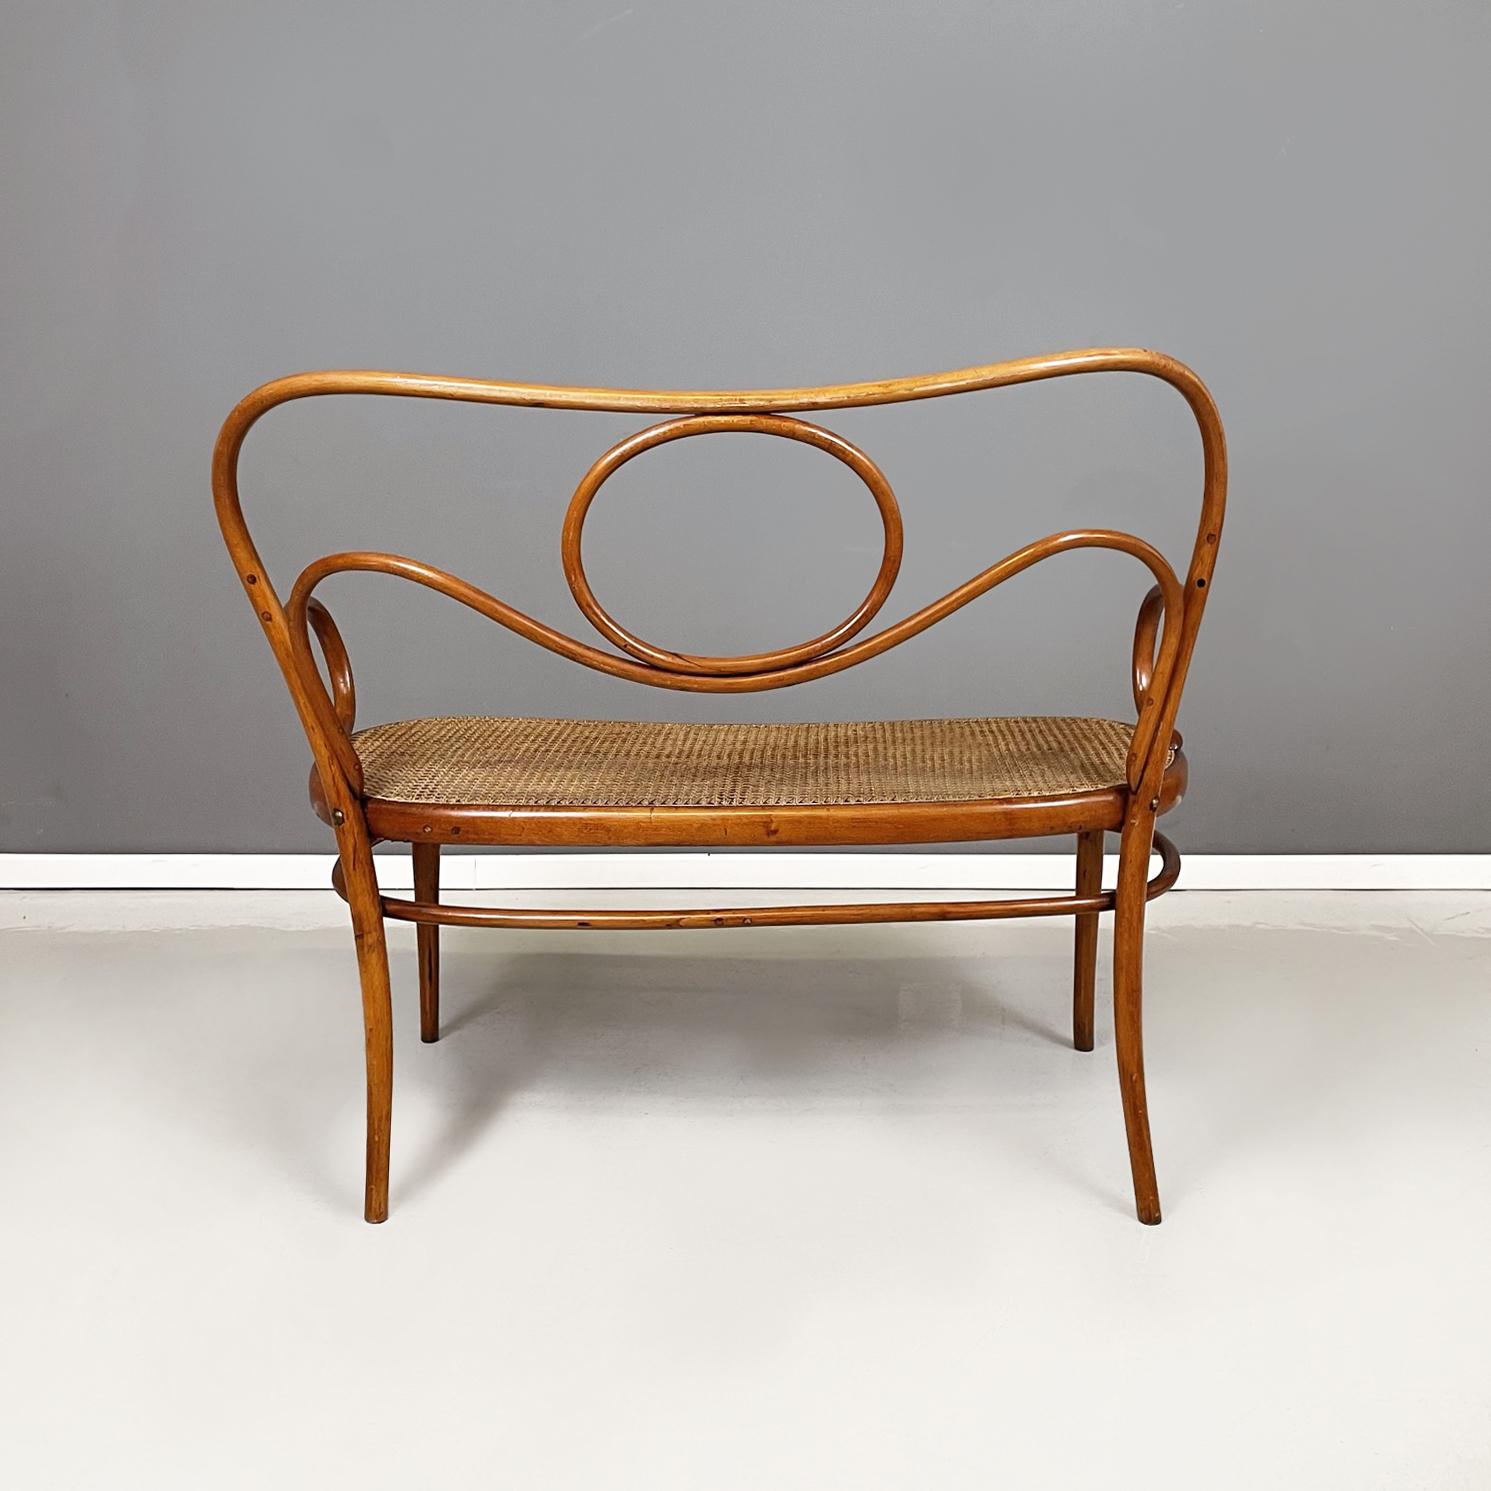 Straw Austrian antique Wooden and Vienna straw two-seater bench by Thonet, early 1900s